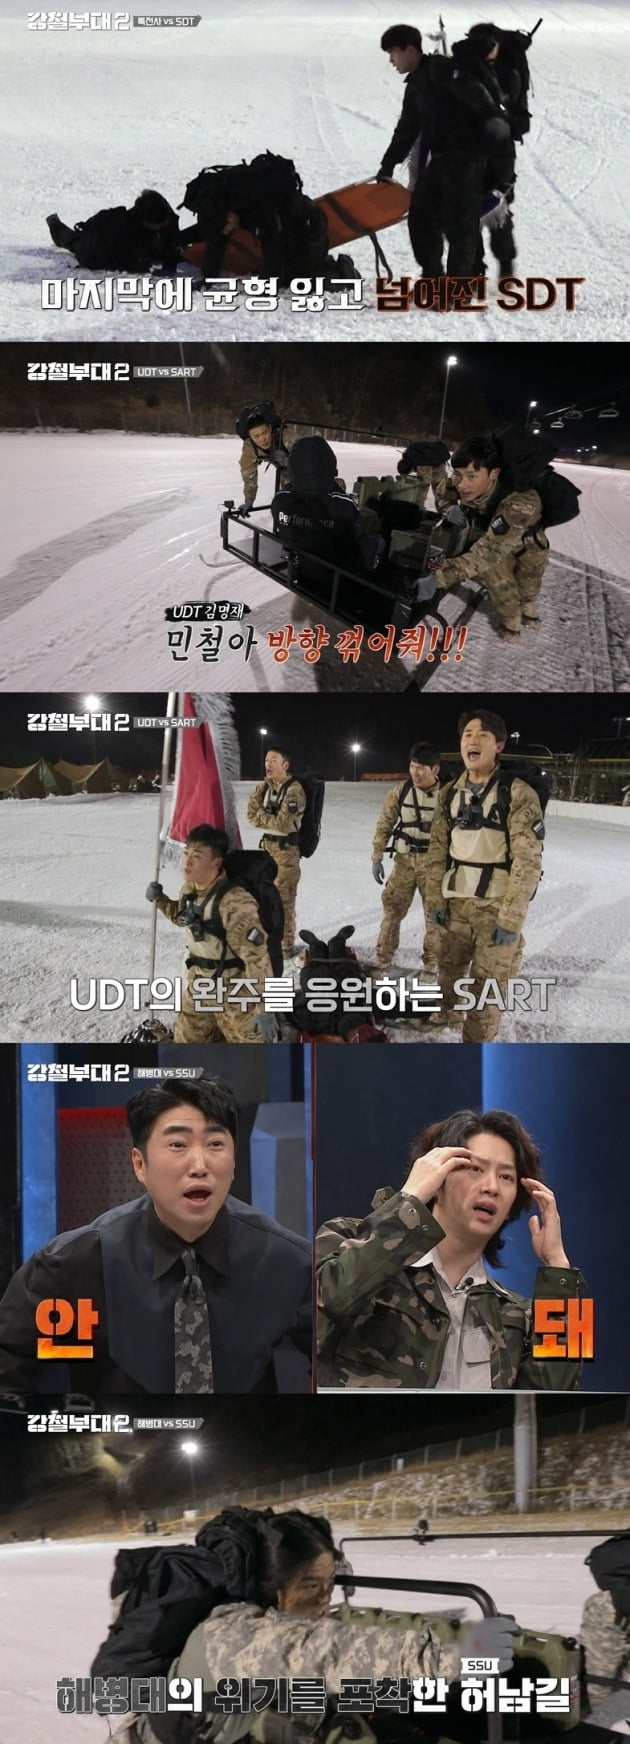 Channel A and SKY channel entertainment Steel Unit 2 showed a sticky comrade that surpassed victory and defeat.In the third episode of Steel Unit 2, which aired on the 8th, the mission of the first elimination team was held to decide whether to take the first elimination team.First, the final winner of the Minorce Selection with a strong Benefit was born.Park Gil-yeon, Marines Search Team, 707 (707th Special Mission Team) Lee Ju-yong, Koo Seong-hoe, Special Warrior (Red Army Special Warfare Command) Choi Yong-joon, SDT (military police special team) Kim Tae-ho, and SSU (Seagun Haenan Rescue Squadron) Heo Nam-gil, the final showdown, are drawn to the 100kg log. I went into.Everyone expected difficulty in the huge weight of logs and frozen snowy snow, but Park Gil-yeon was impressed by his unstoppable eyes with Jun Jin.Lee Ju-yong then showed off the power of Yong-gun by Jun Jin with explosive speed even after a late start.The two men, who quickly reached the return point, rushed to the finish with the flag of the unit, and Park Gil-yeon, who missed the flag, eventually turned over to Lee Ju-yong.Lee Ju-yong took first place after the game, and Park Gil-yeon and Choi Yong-joon climbed to second and third place and were honored by Minforce.Especially, even though the game was over, the appearance of Kim Tae-ho and Huh Nam-gil, who are continuing the mission firmly, caught the eye.Koo Seong-hoe struggled with a sudden depletion of his stamina, and the same men, Lee Ju-yong, Hong Myung-hwa and Lee Jung-won, expressed their concerns about him.So 707 helped all the steel unit members to support the hot cheering and succeeded in completing the race, and gave a deep impression with a strong friendship that transcended victory and defeat.Lee Ju-yong, Park Gil-yeon and Choi Yong-joon, who won the championship in the fierce Minorce crew selection contest, Choi Choices the Benefits of Daejin decision, Operation acquisition and Operation Choices respectively.The commission for the Occupy of the Snowy Land, which will continue to be decided to be eliminated from the first team, was released, and 707 and Marines created a favorable vote for themselves with a joint strategy.In the first round of the Sulhanji Occupy War, special warrior and SDT were confronted, raising interest.The two units, who ran quickly and reached the point, pushed a 500kg sled and operated, and repeatedly reversed without any break, raising tension extremely.In the urgent situation that ran to the finish after securing the Dummy following the acquisition of additional supplies, the balance of SDT collapsed and the special warrior was honored with victory.In the second round, the struggle between the new participating unit SART and the season 1 winning unit UDT took place.The current mountain rescue team, SART, has skillfully performed Dummy rescue missions, pressing UDT at a tremendous rate, reaching the finish line comfortably and proving its reputation as a rescue unit.SSU, which faced Marines at the end of the broadcast, outpaced Marines with overwhelming speed, but was also in crisis when it was reversed by Marines at sled point.But Marines supplies fell from the sled and the SSU once again seized the opportunity, signalling an unpredictable development.Indeed, the SSU hopes that it will be able to succeed in the reversal, and where will the troops that will be the first to be eliminated.Also, the confrontation between 707 and information company, which will be held next week, is also focused.Information company Lee Dong-gyu said, I think I was drunk that I won the selection of Miniforce members.What is that? He also focused on the confrontation with 707, who won first place in the selection of the Miniforce team.steel unit 2 is broadcast every Tuesday at 9:20 pm.